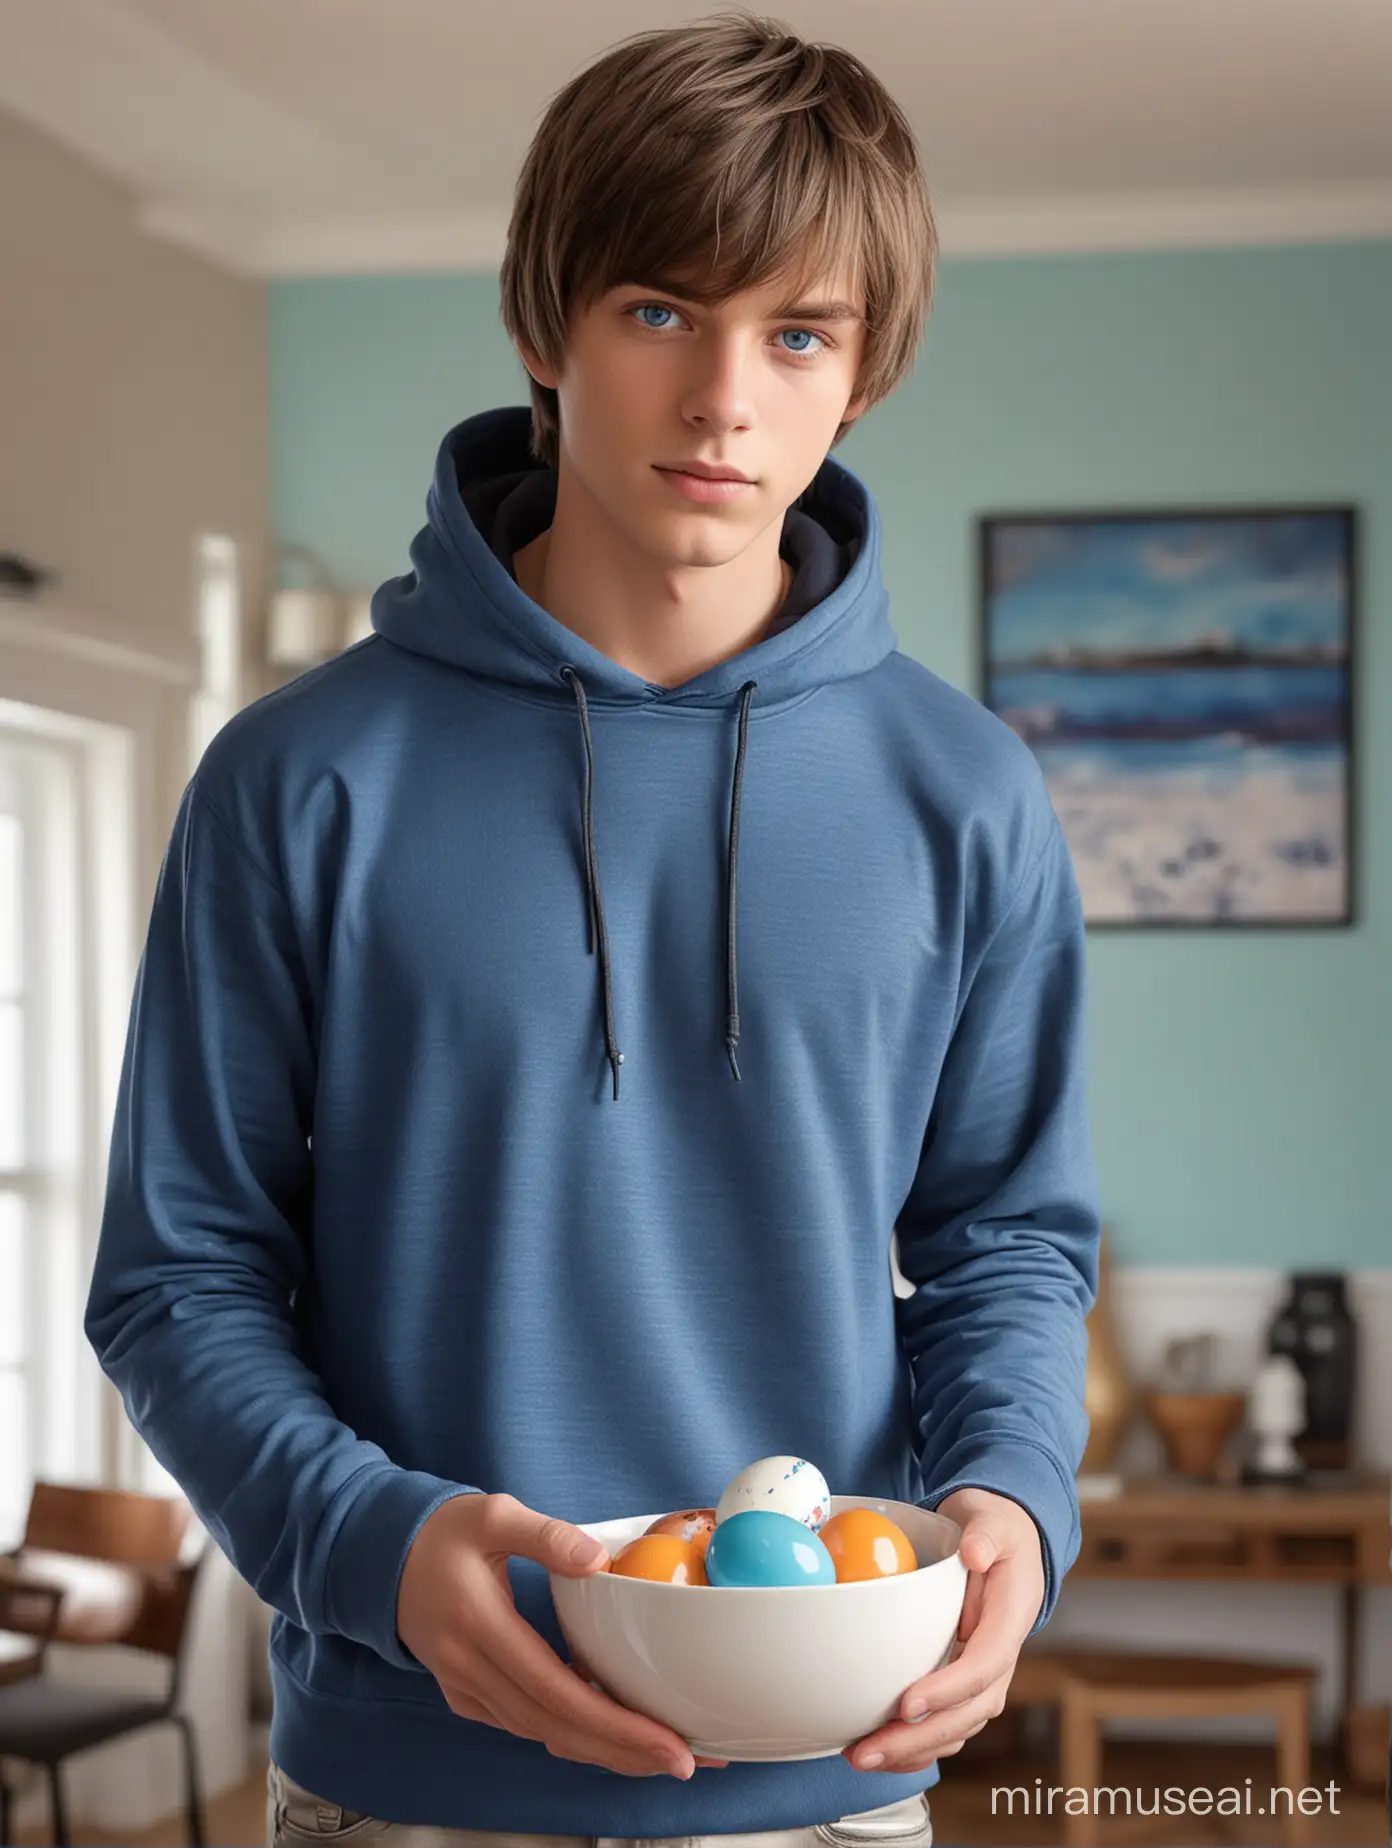 Visible 18 year old boy, one very handsome, brunette shiny straight hair, short hairstyle with long bangs, bright blue eyes with highlights, tan, athletic figure, detailed rendering of skin hair and fingers, wearing a blue hooded sweatshirt, black jeans, full  a figure standing in a room holding a bowl full of colored eggs in front of him